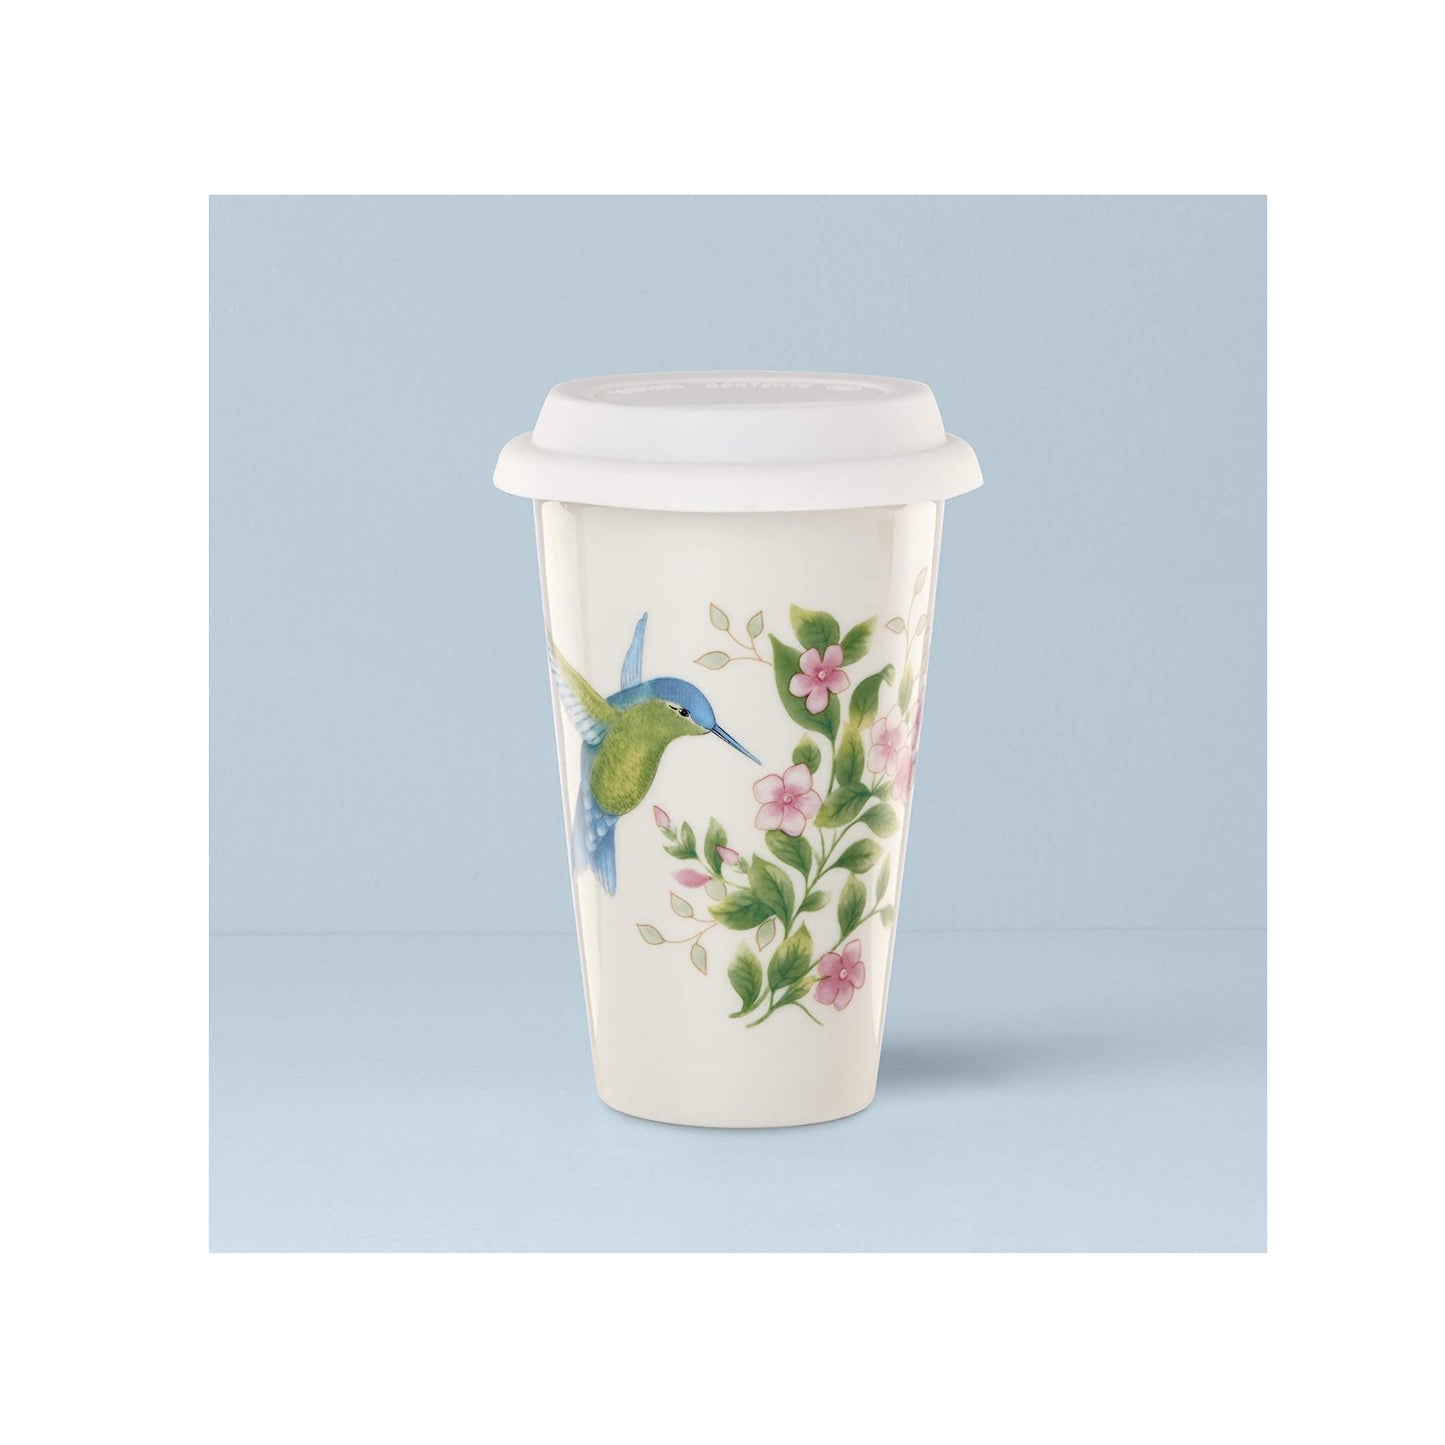 Butterfly Meadow Thermal Travel Mug by Lenox